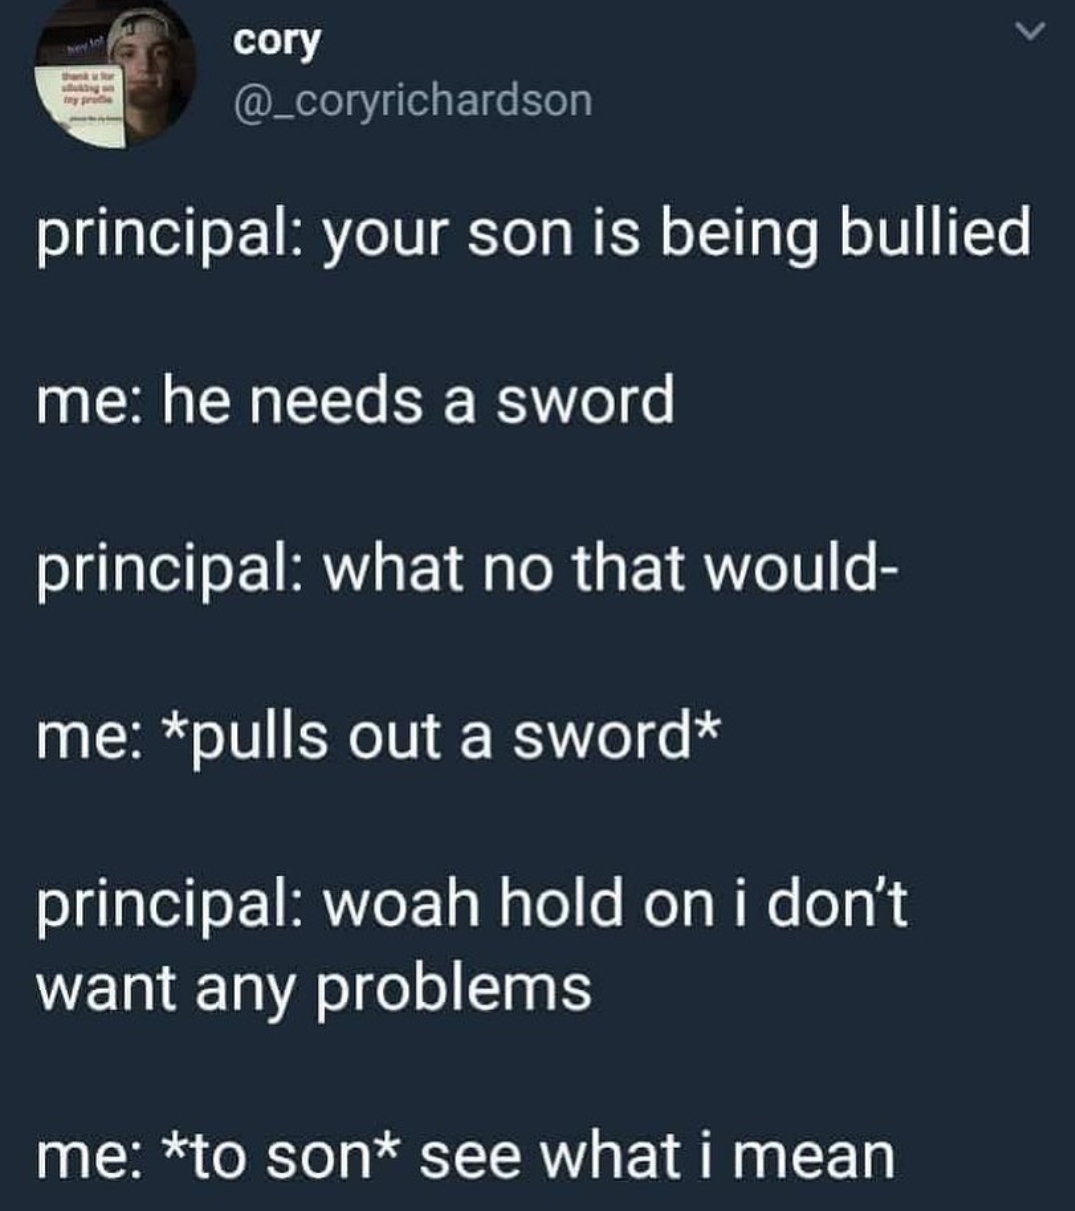 meme sword meme - cory principal your son is being bullied me he needs a sword principal what no that would t me pulls out a sword principal woah hold on i don't want any problems me to son see what i mean